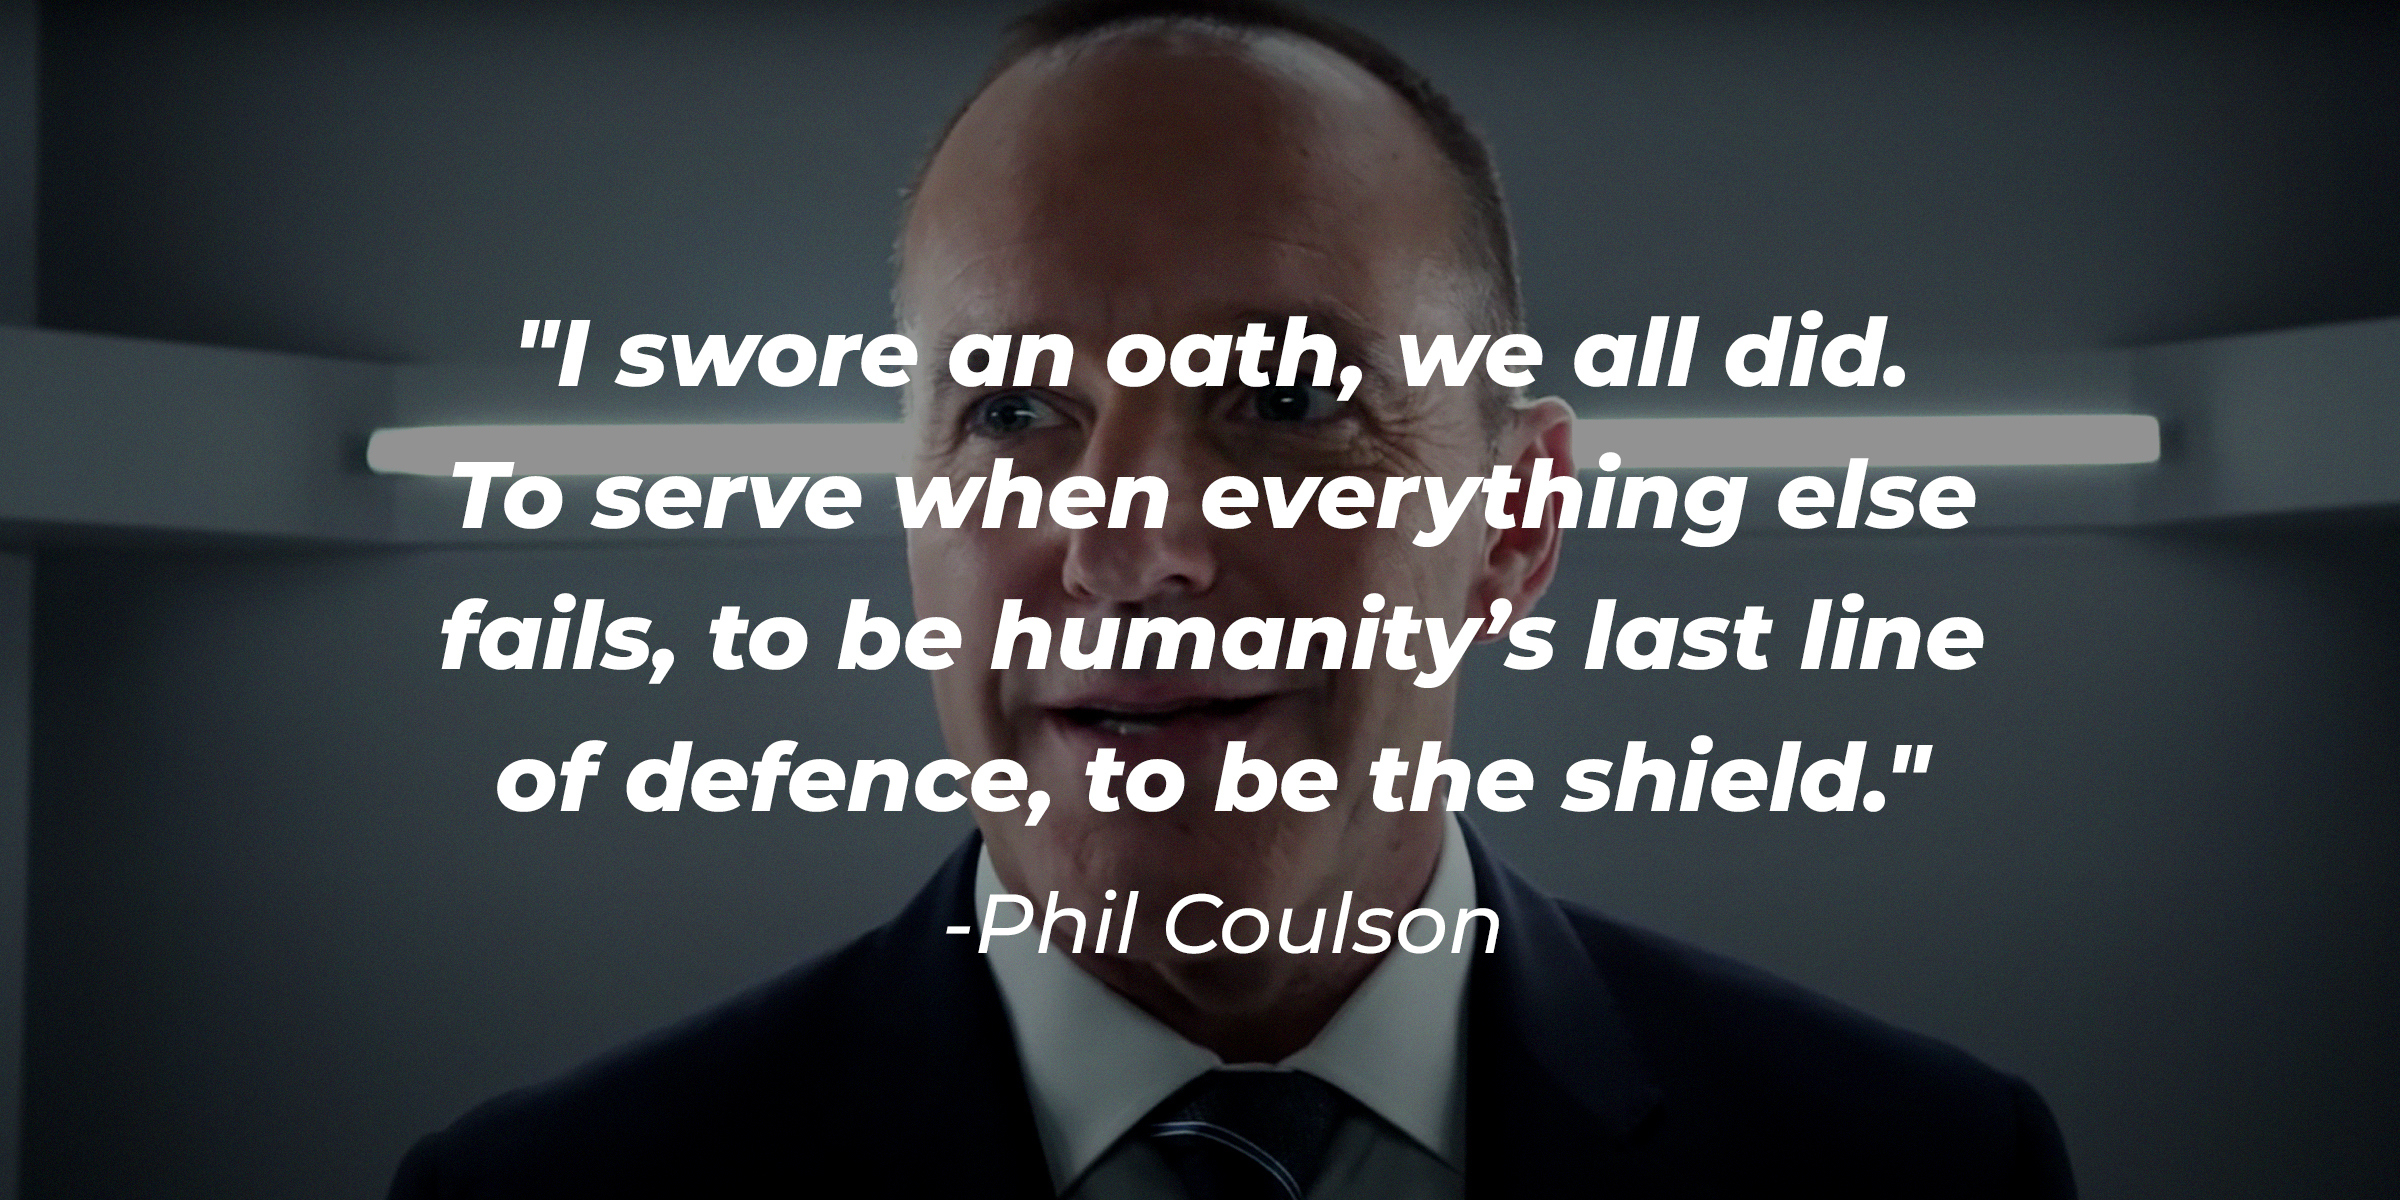 Phil Coulson with his quote: "I swore an oath, we all did. To serve when everything else fails, to be humanity's last line of defence, to be the shield." | Source: youtube.com/ABCNetwork